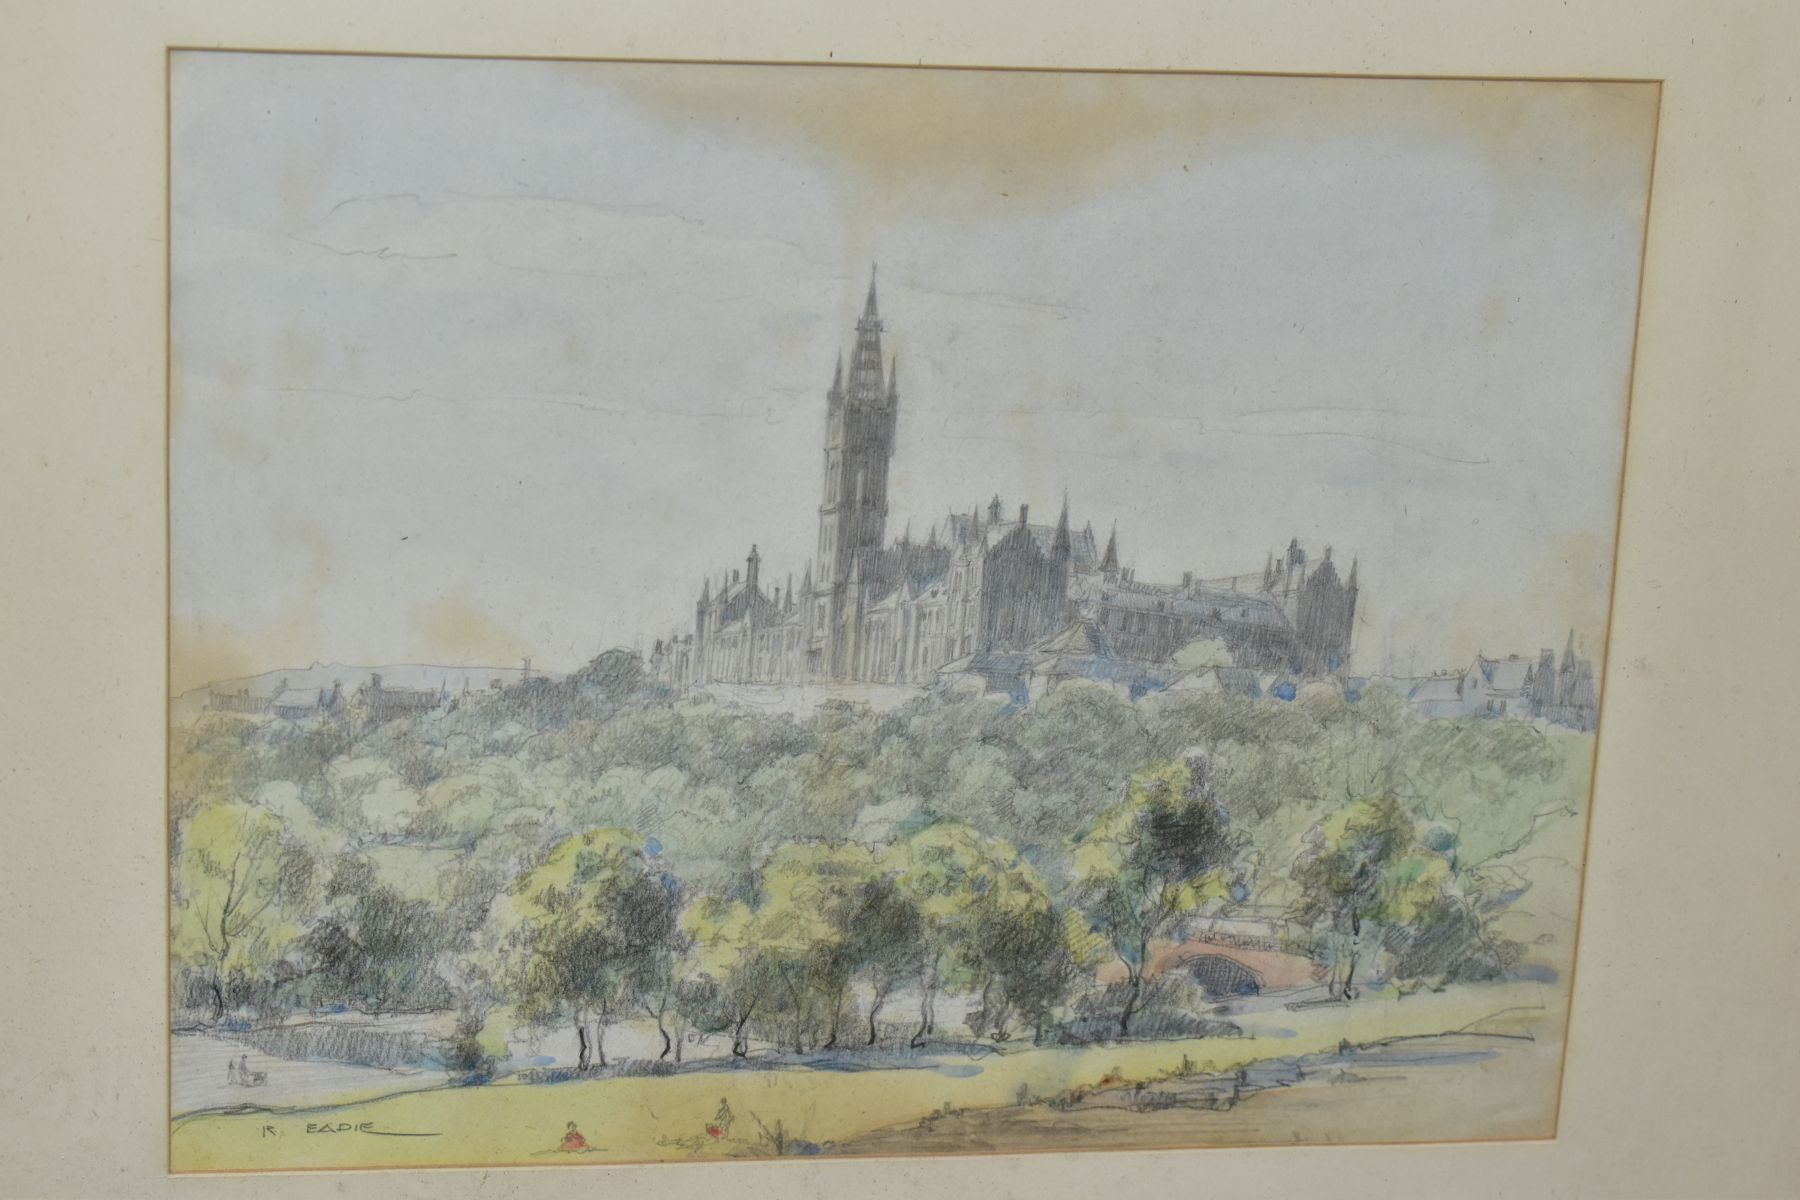 ROBERT EADIE (1877-1954) 'MARISCHAL COLLEGE ABERDEEN', signed bottom right, watercolour and pencil - Image 2 of 8